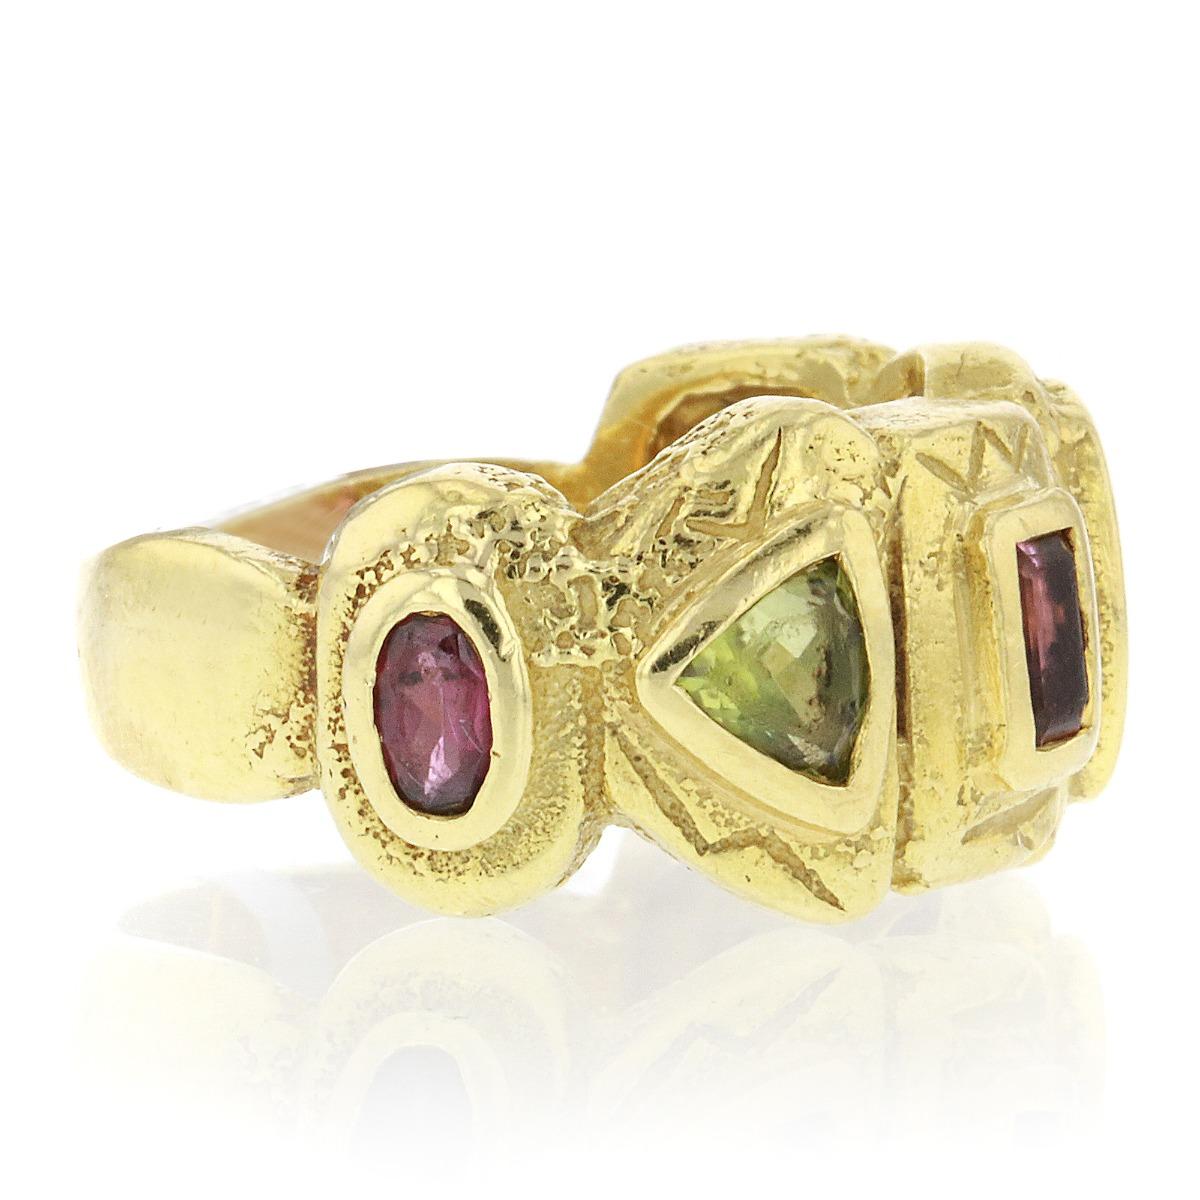 18K Yellow Gold Multistone Ring
13.00 Penny Weight

Ring Size: 7
Center Stone: 
Gemstone: 
Stone Count: 
Stone Shape: Multishape  
Color Grade: G-H
Clarity Grade: SI1-SI2
Polish: Very Good
Symmetry: Very Good
Fluorescence: None